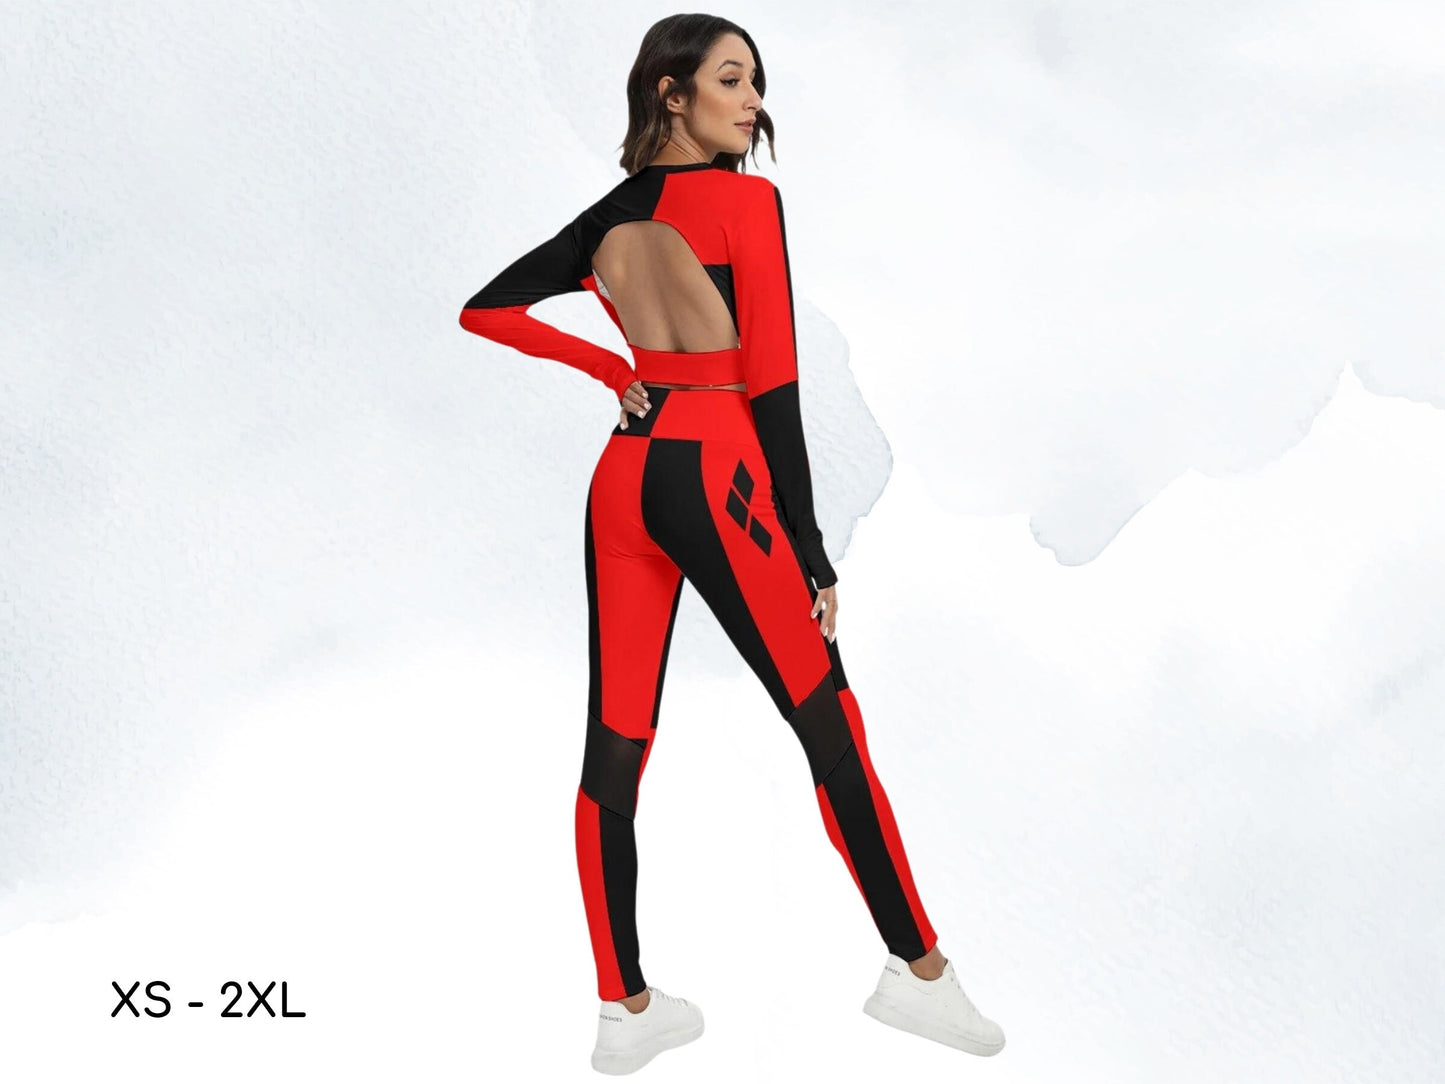 Queen of Diamonds Women's Sport Set With Backless Top And Leggings, Sexy Cosplay, Adult Halloween Costume, Cosplay Outfit, Gift for Her